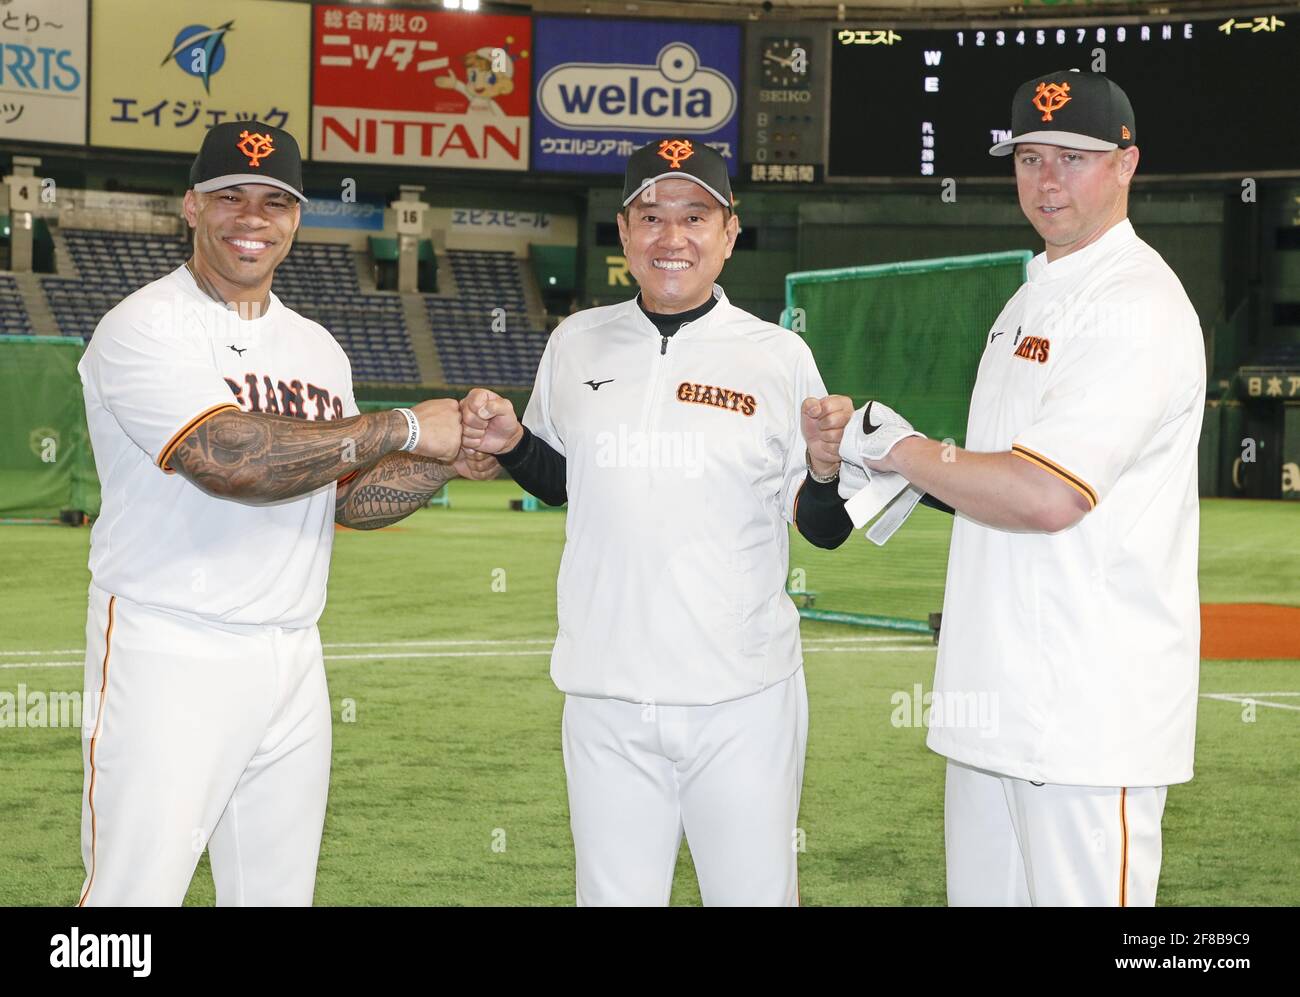 Tokyo, Japan. April 13, 2021: New Yomiuri Giants outfielder Eric Thames (L)  and first baseman Justin Smoak (R) pose for a photo with manager Tatsunori  Hara at Tokyo Dome on April 13